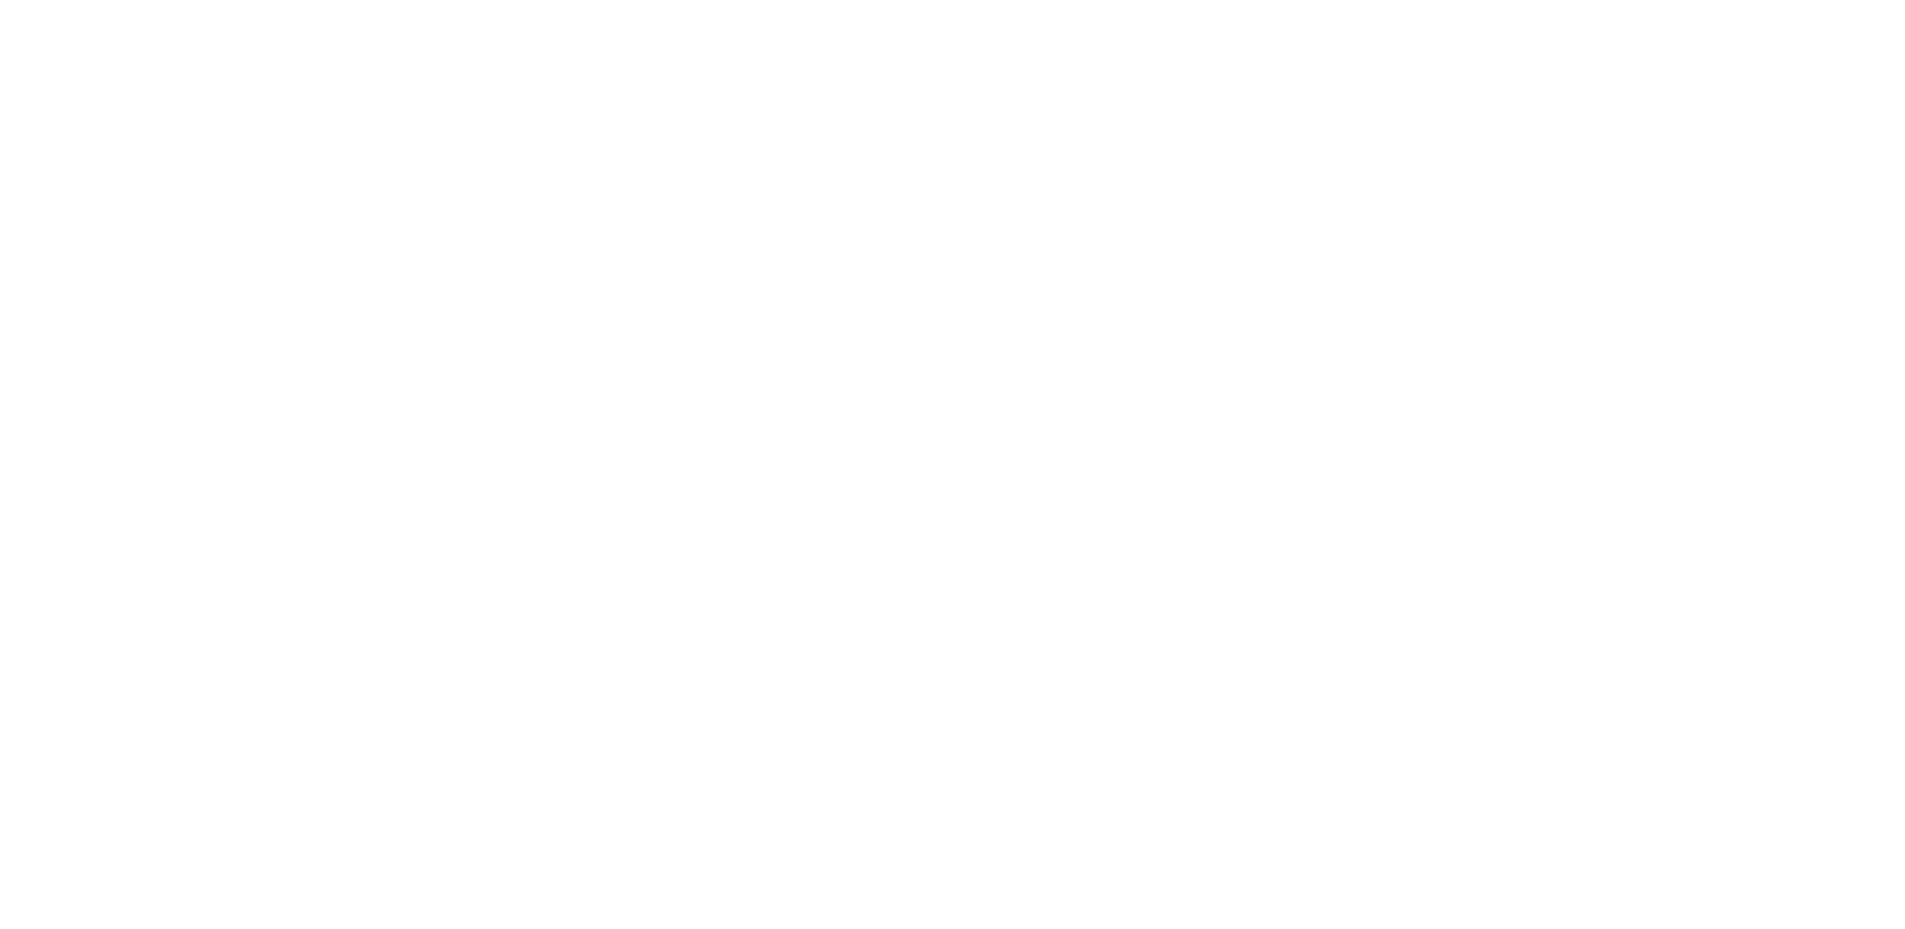 Business & Executive Coaching Programs Wisconsin | Chisel ActionCOACH